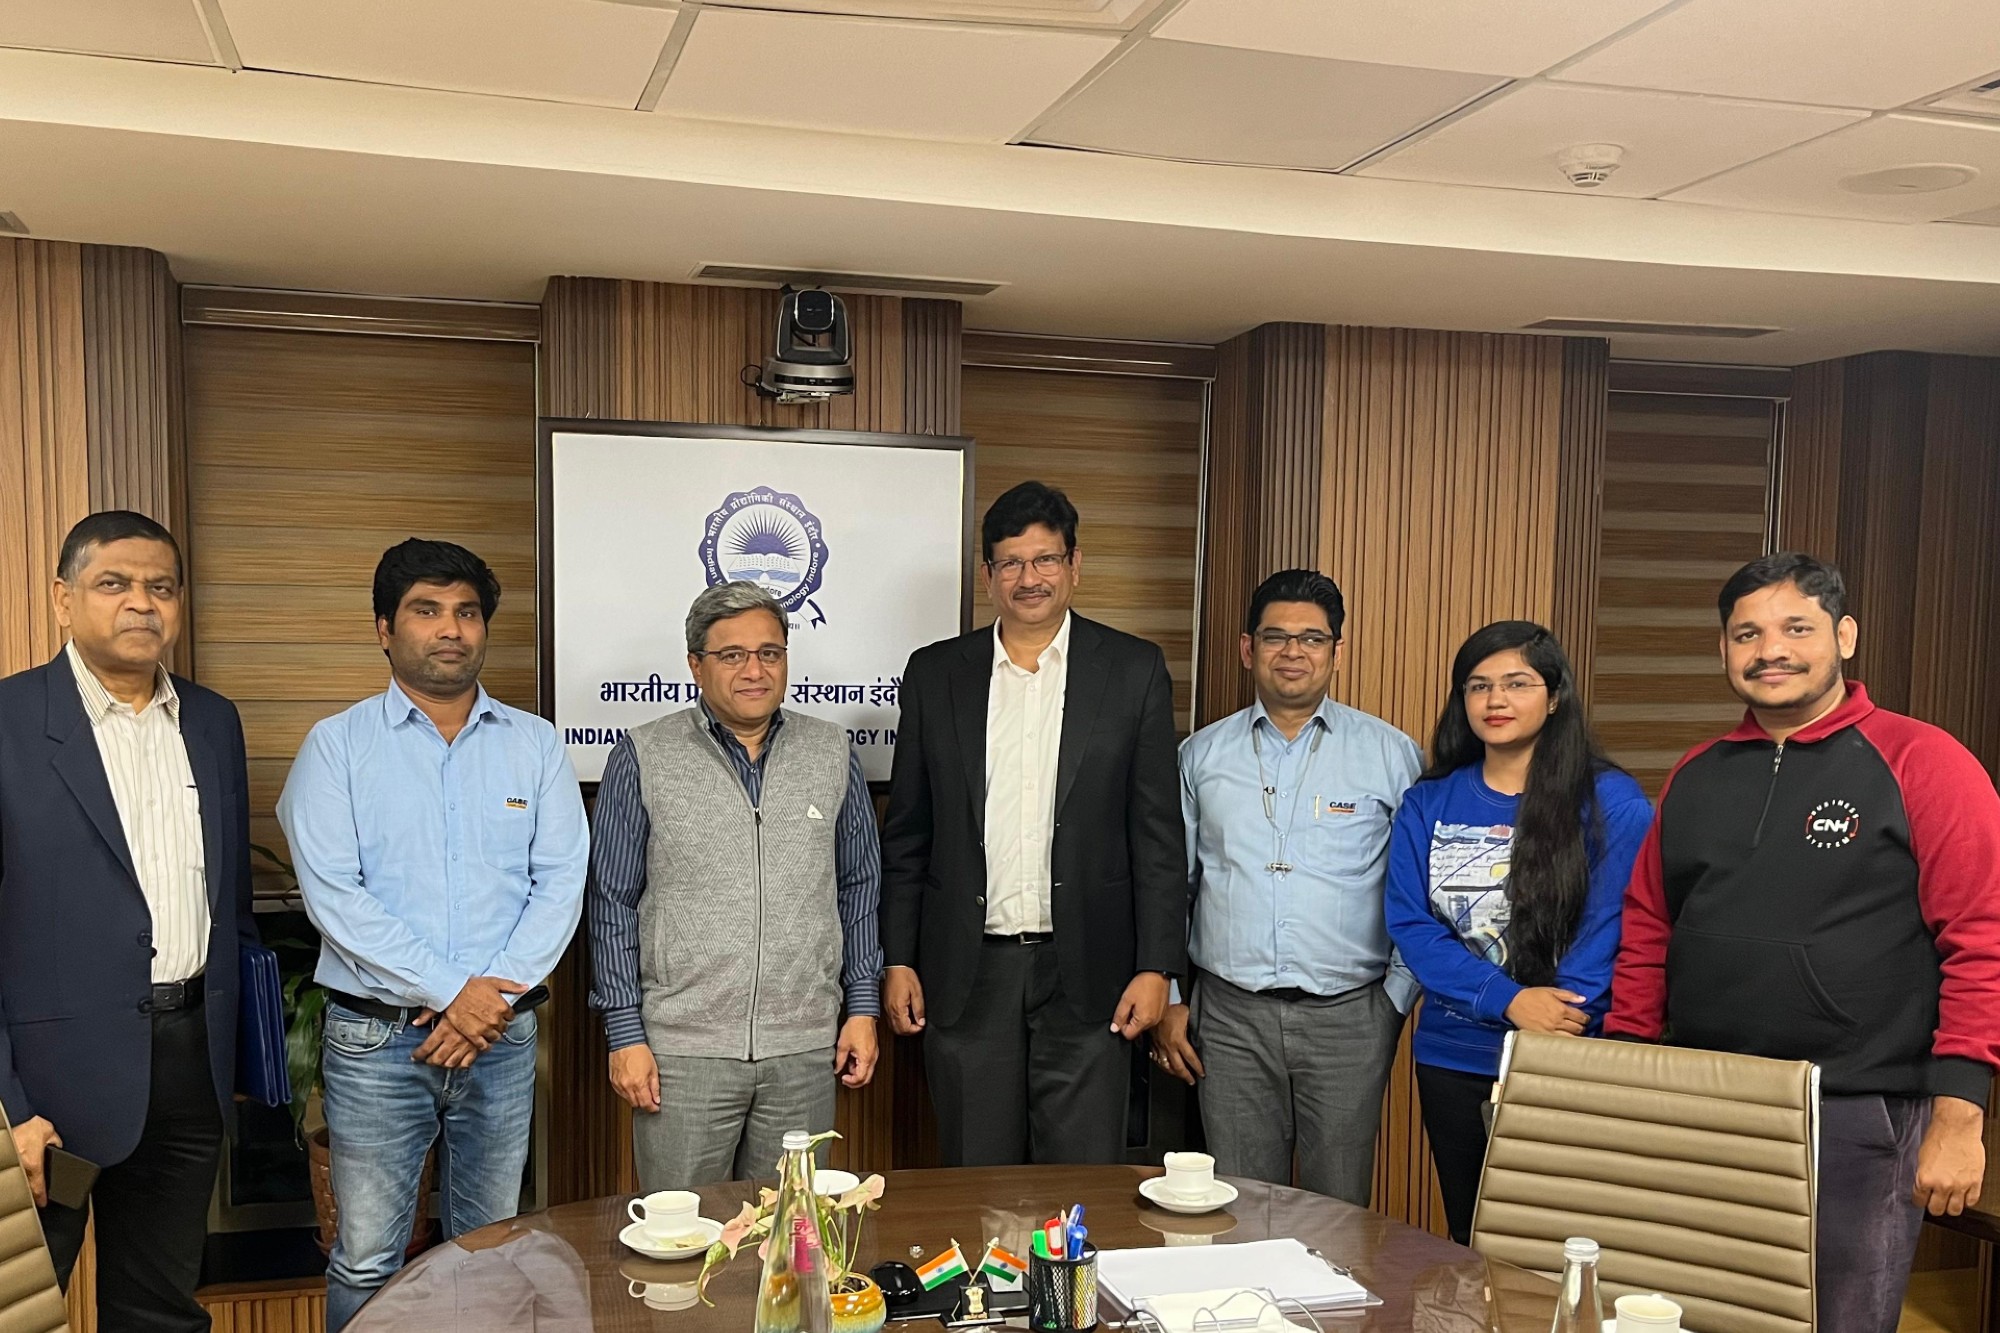 CASE Construction Equipment signs MOU with IIT Indore